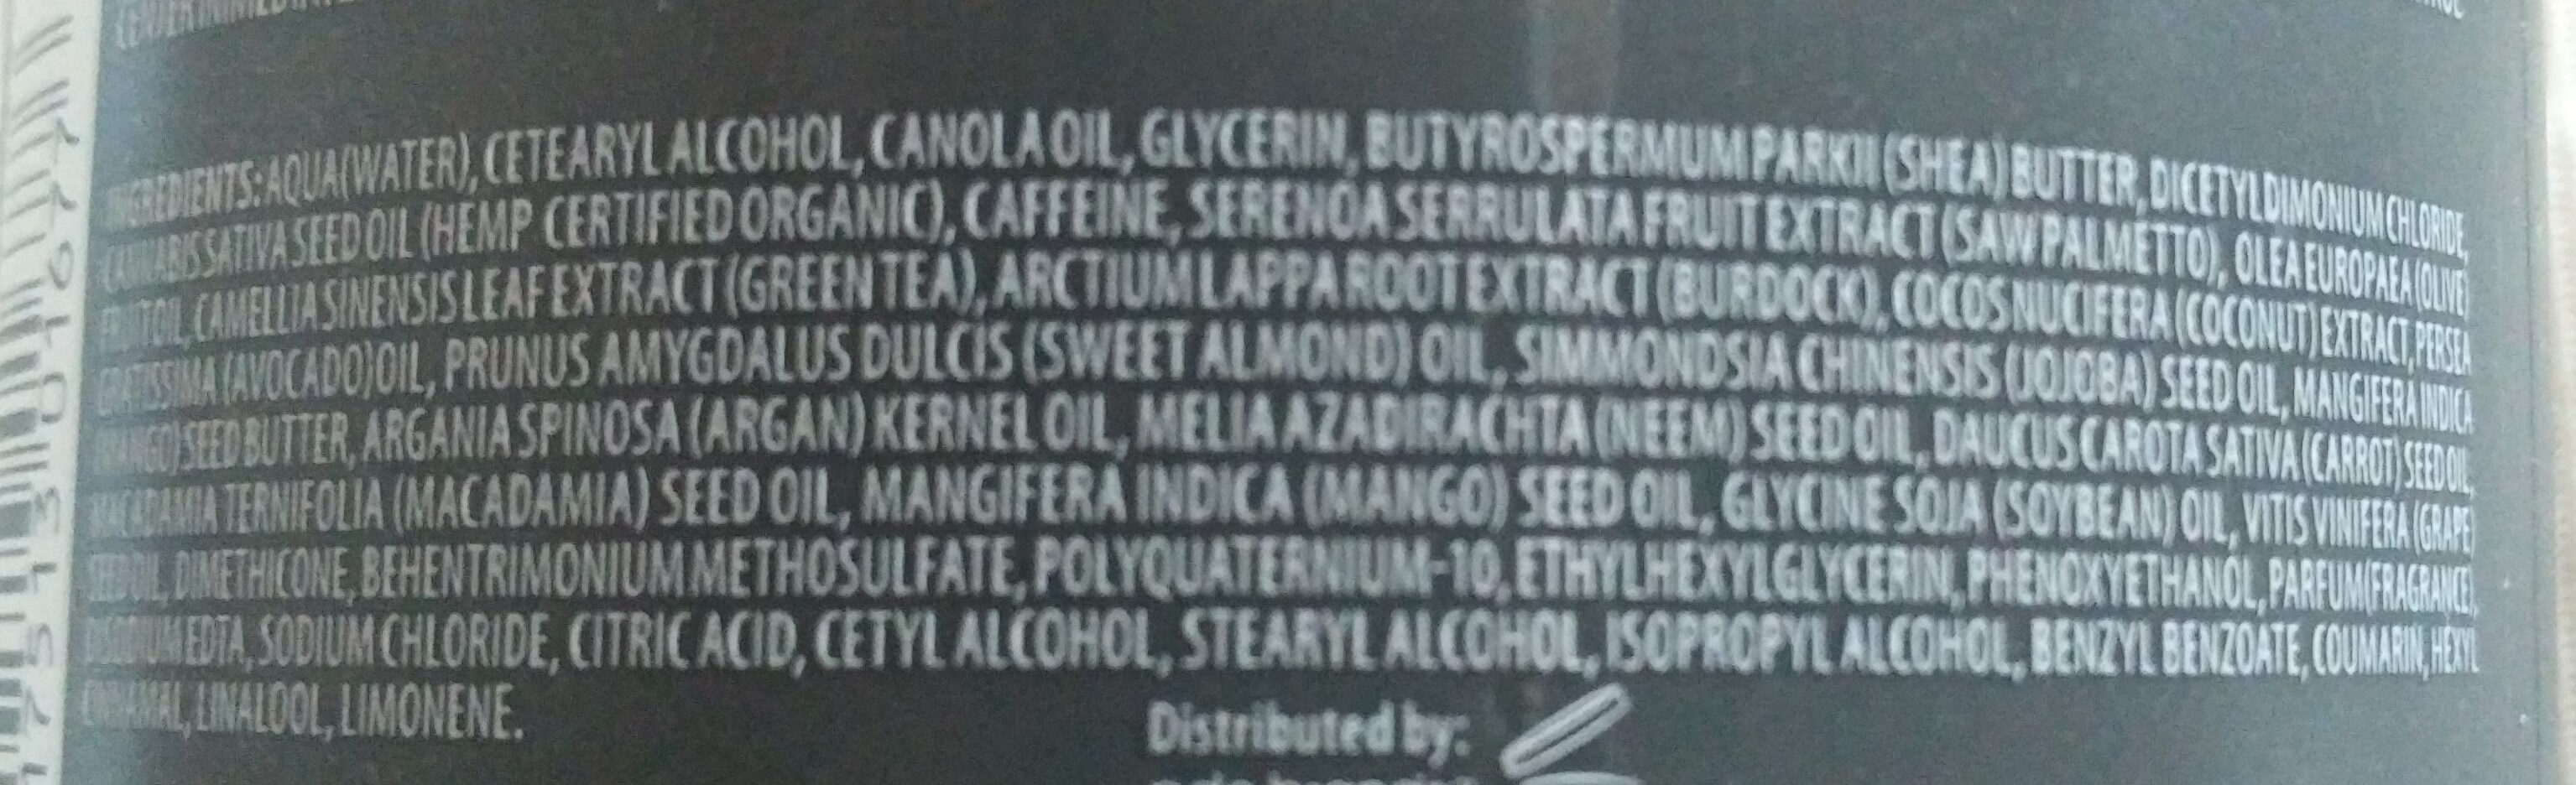 Shea Butter Leave-In-Conditioner - Ingredients - de